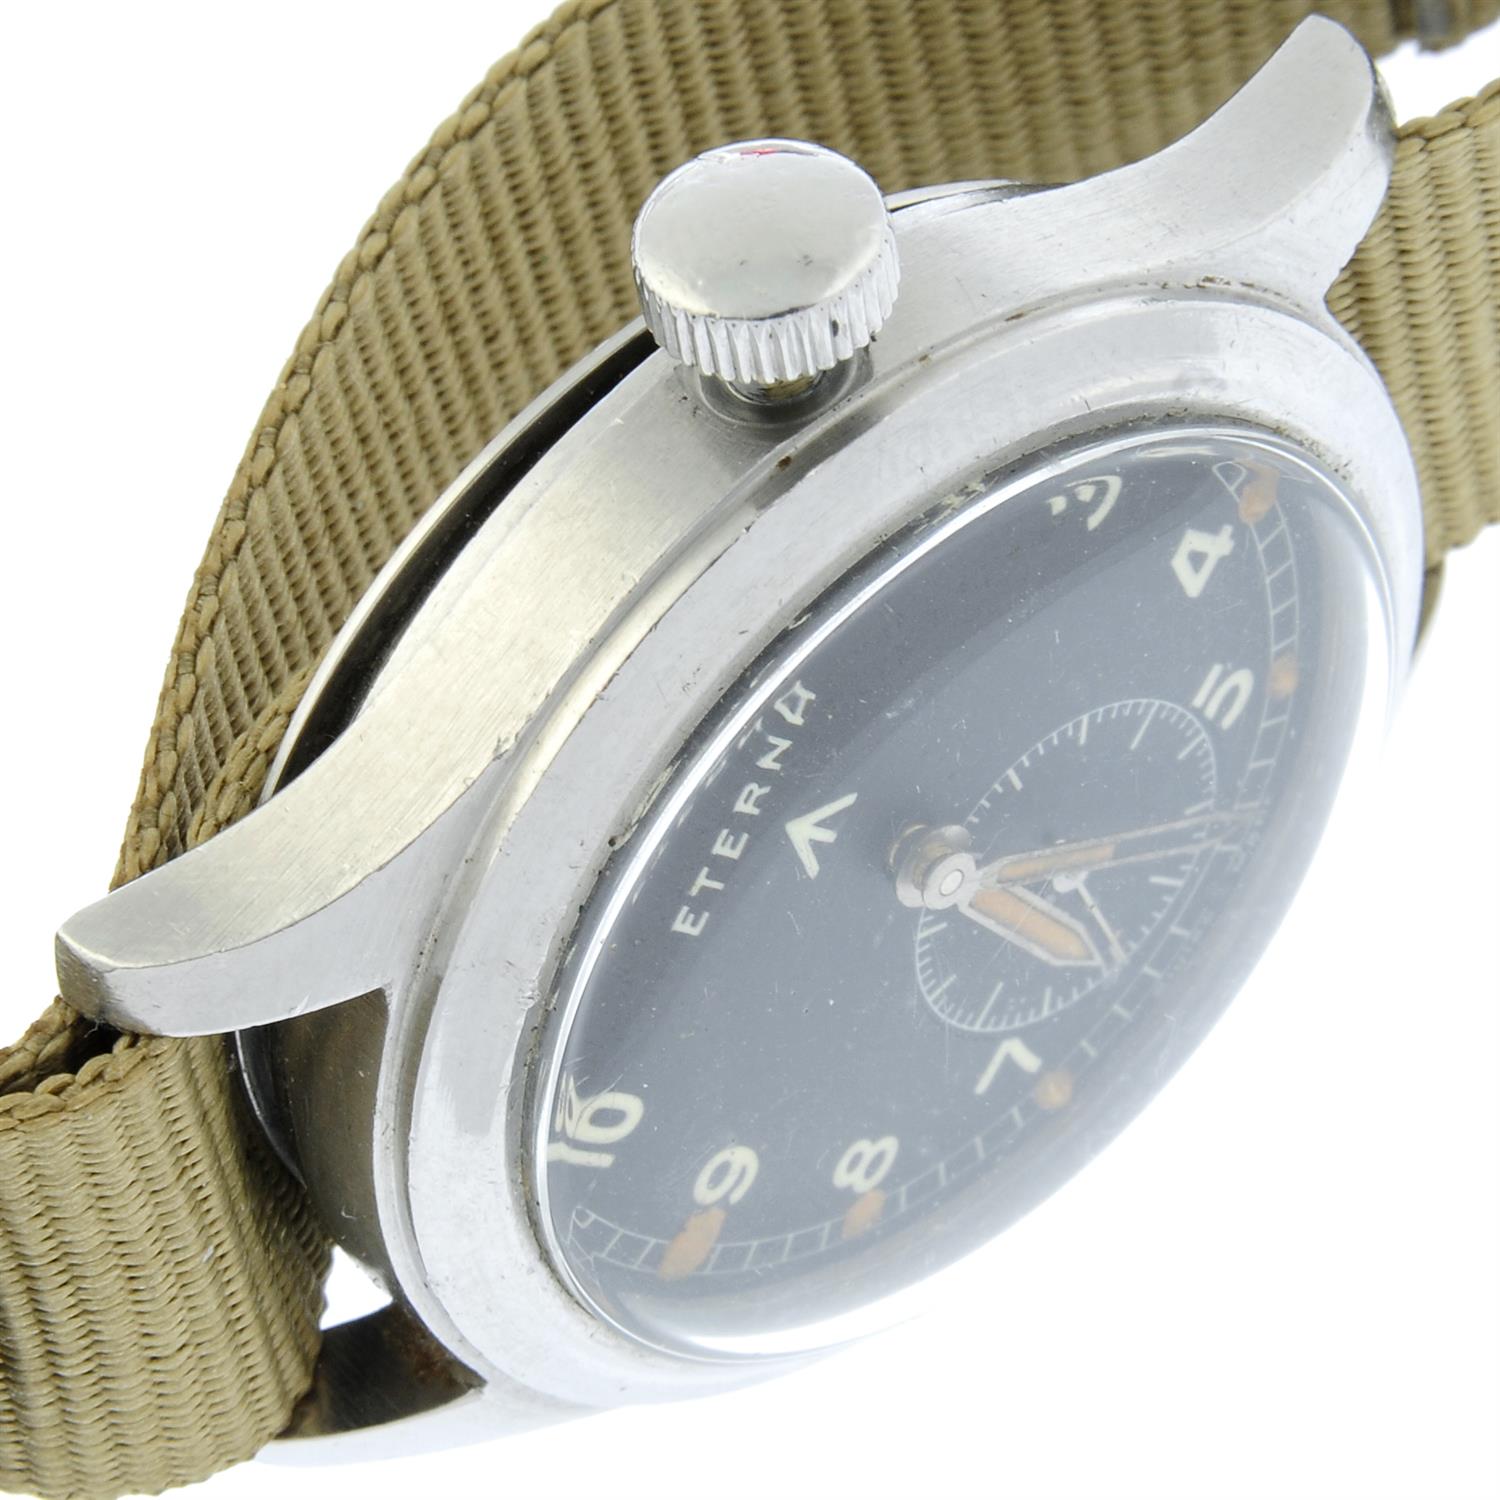 Eterna - a military issue 'Dirty Dozen' watch, 36mm. - Image 3 of 4